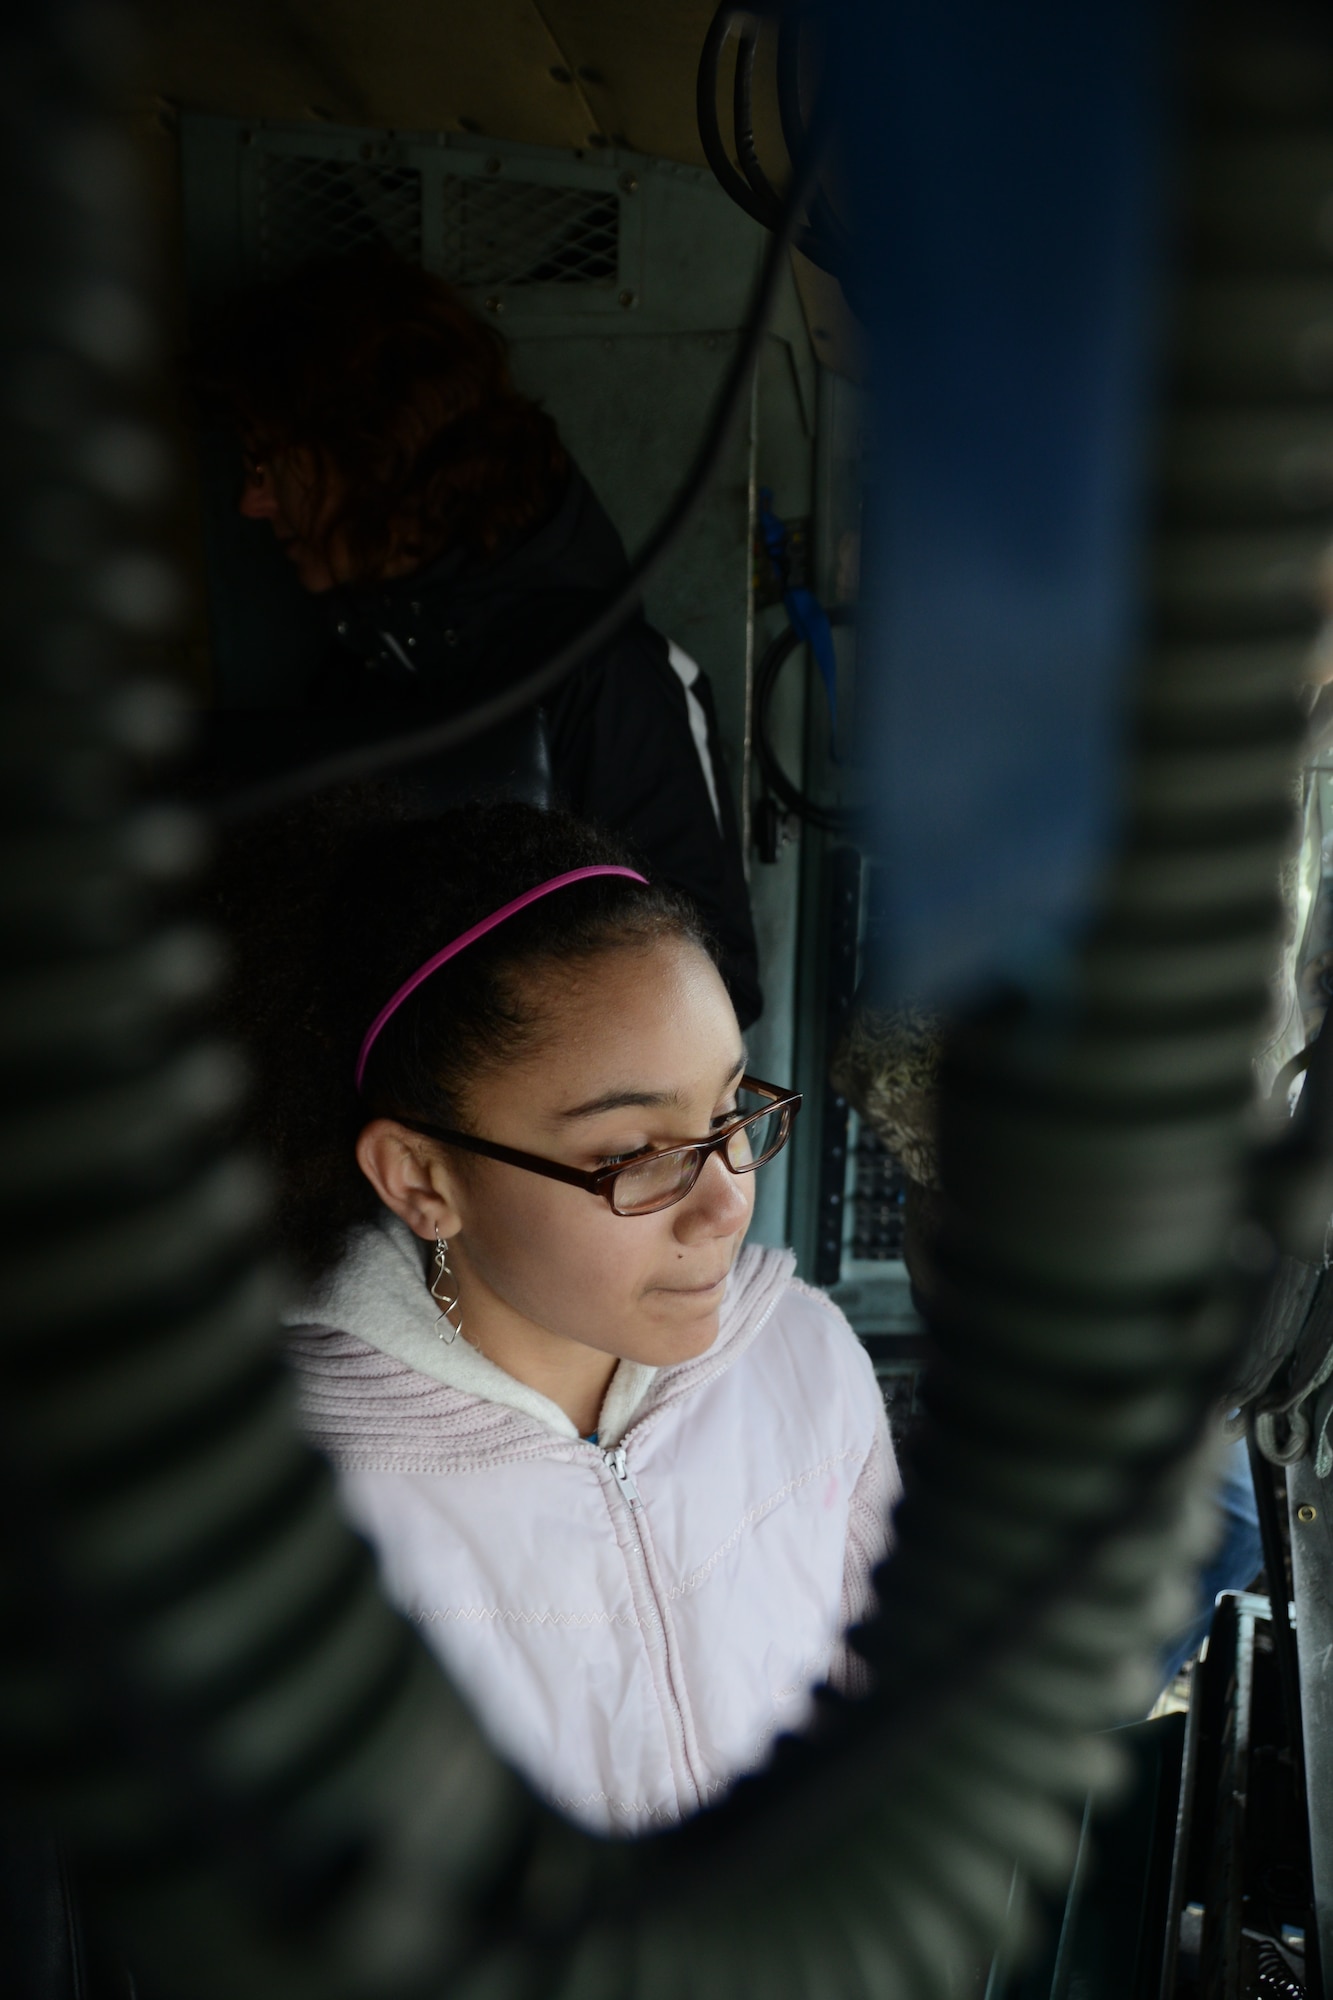 Sitting in the cockpit, Mia Jones, 12, daughter of Master Sgt. Peter Jones, First Sergeant with the 103rd Aircraft Maintenance Squadron, listens intently to 1st Lt. Paul Bolduc (not-pictured), a pilot from the 118th Airlift Squadron, as he explains what it takes to be a C-130H pilot during a tour of Bradley Air National Guard Base, East Granby, Conn., April 5, 2014. The tour was put on by the Connecticut National Guard Youth Council affording participants with a chance to sit at the controls of a C-130H, climb up into a crash and fire rescue truck assigned to the 103rd Civil Engineering Squadron’s fire house and a chance to witness a 103rd Security Forces training exercise up close. (U.S. Air National Guard photo by Tech. Sgt. Joshua Mead)  